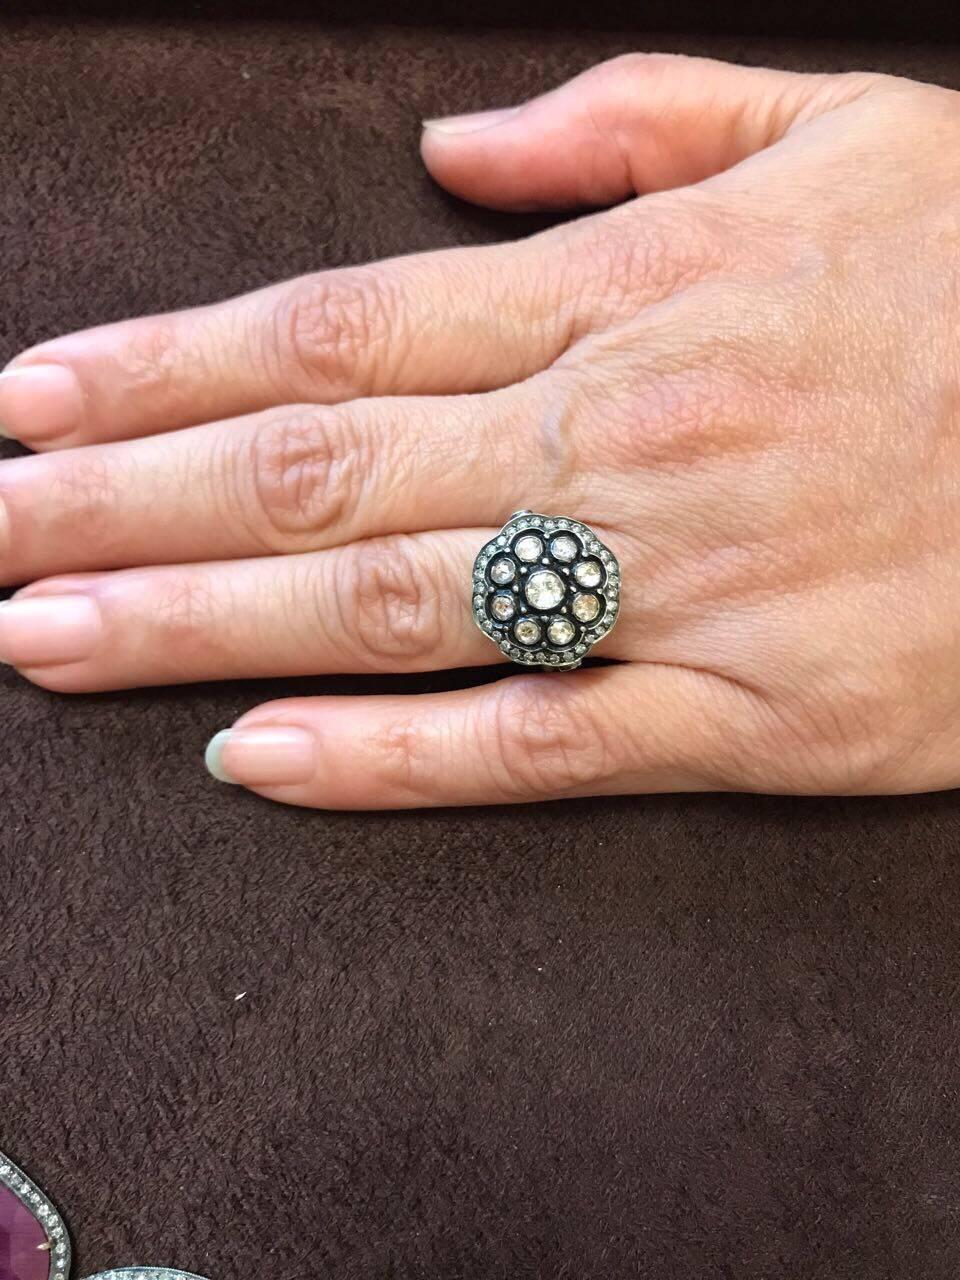 Gorgeous handmade, antique looking cocktail ring, with rose cut and single cut diamonds embedded in silver and gold. The ring can be resized as required.

Diamond Details:
Total Carat Weight: 0.83 carat
Quality: VS/SI , H/I

Gold and Silver Weight: